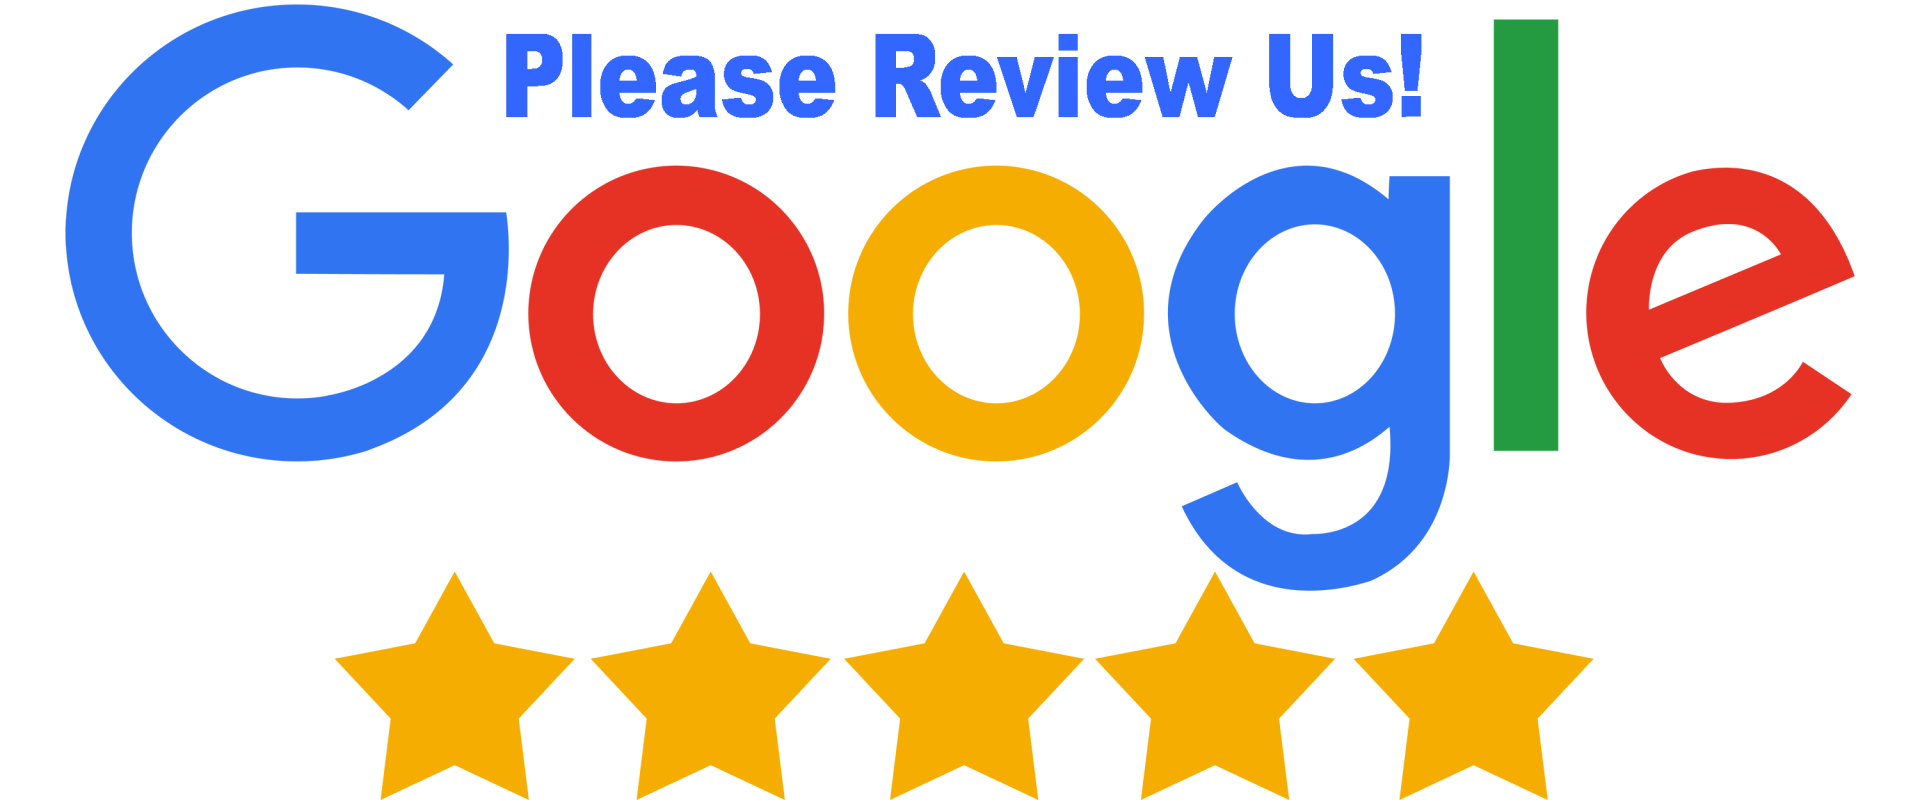 Click Here to Review Us on Google!